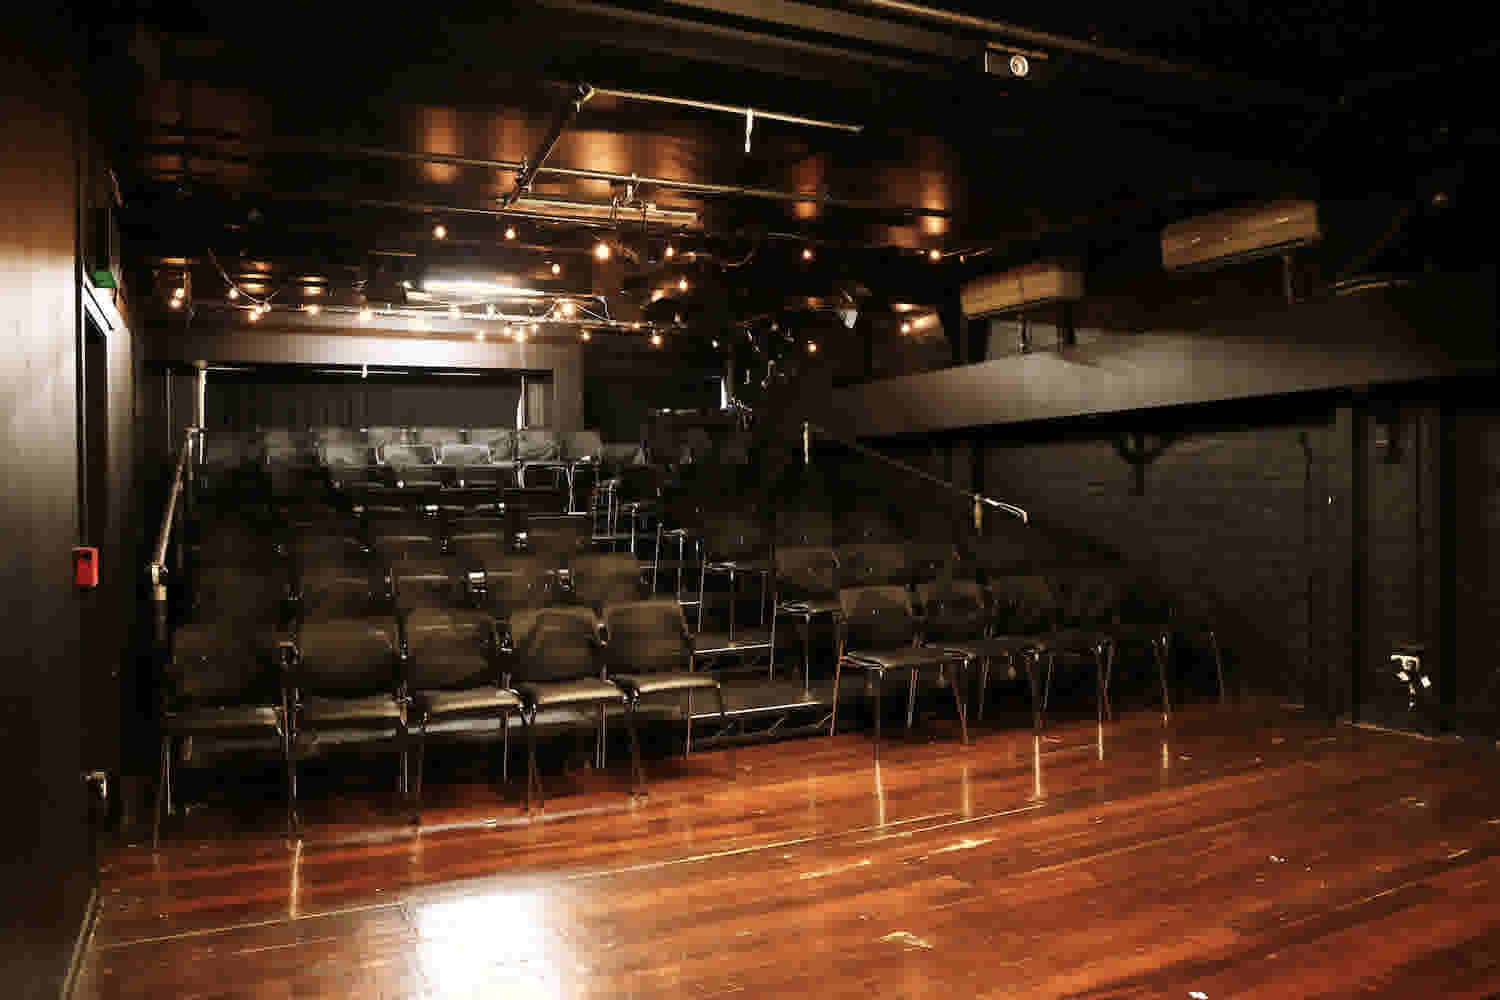 Basement Theatre's smaller Studio performance space showing the seating block and performance area - taken from the stage. 